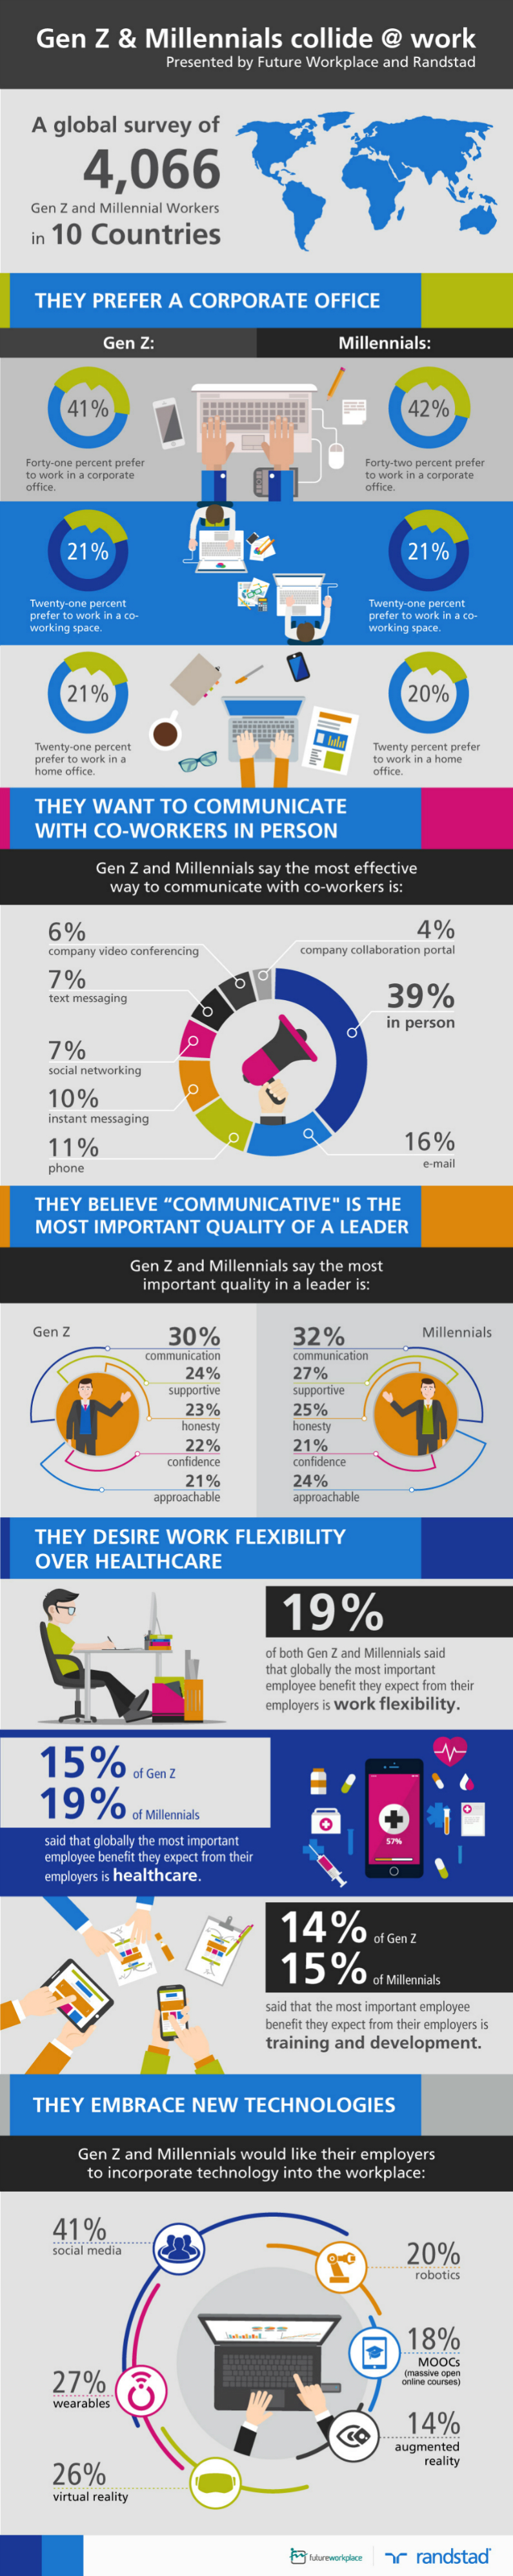 what millennials and gen y want from management